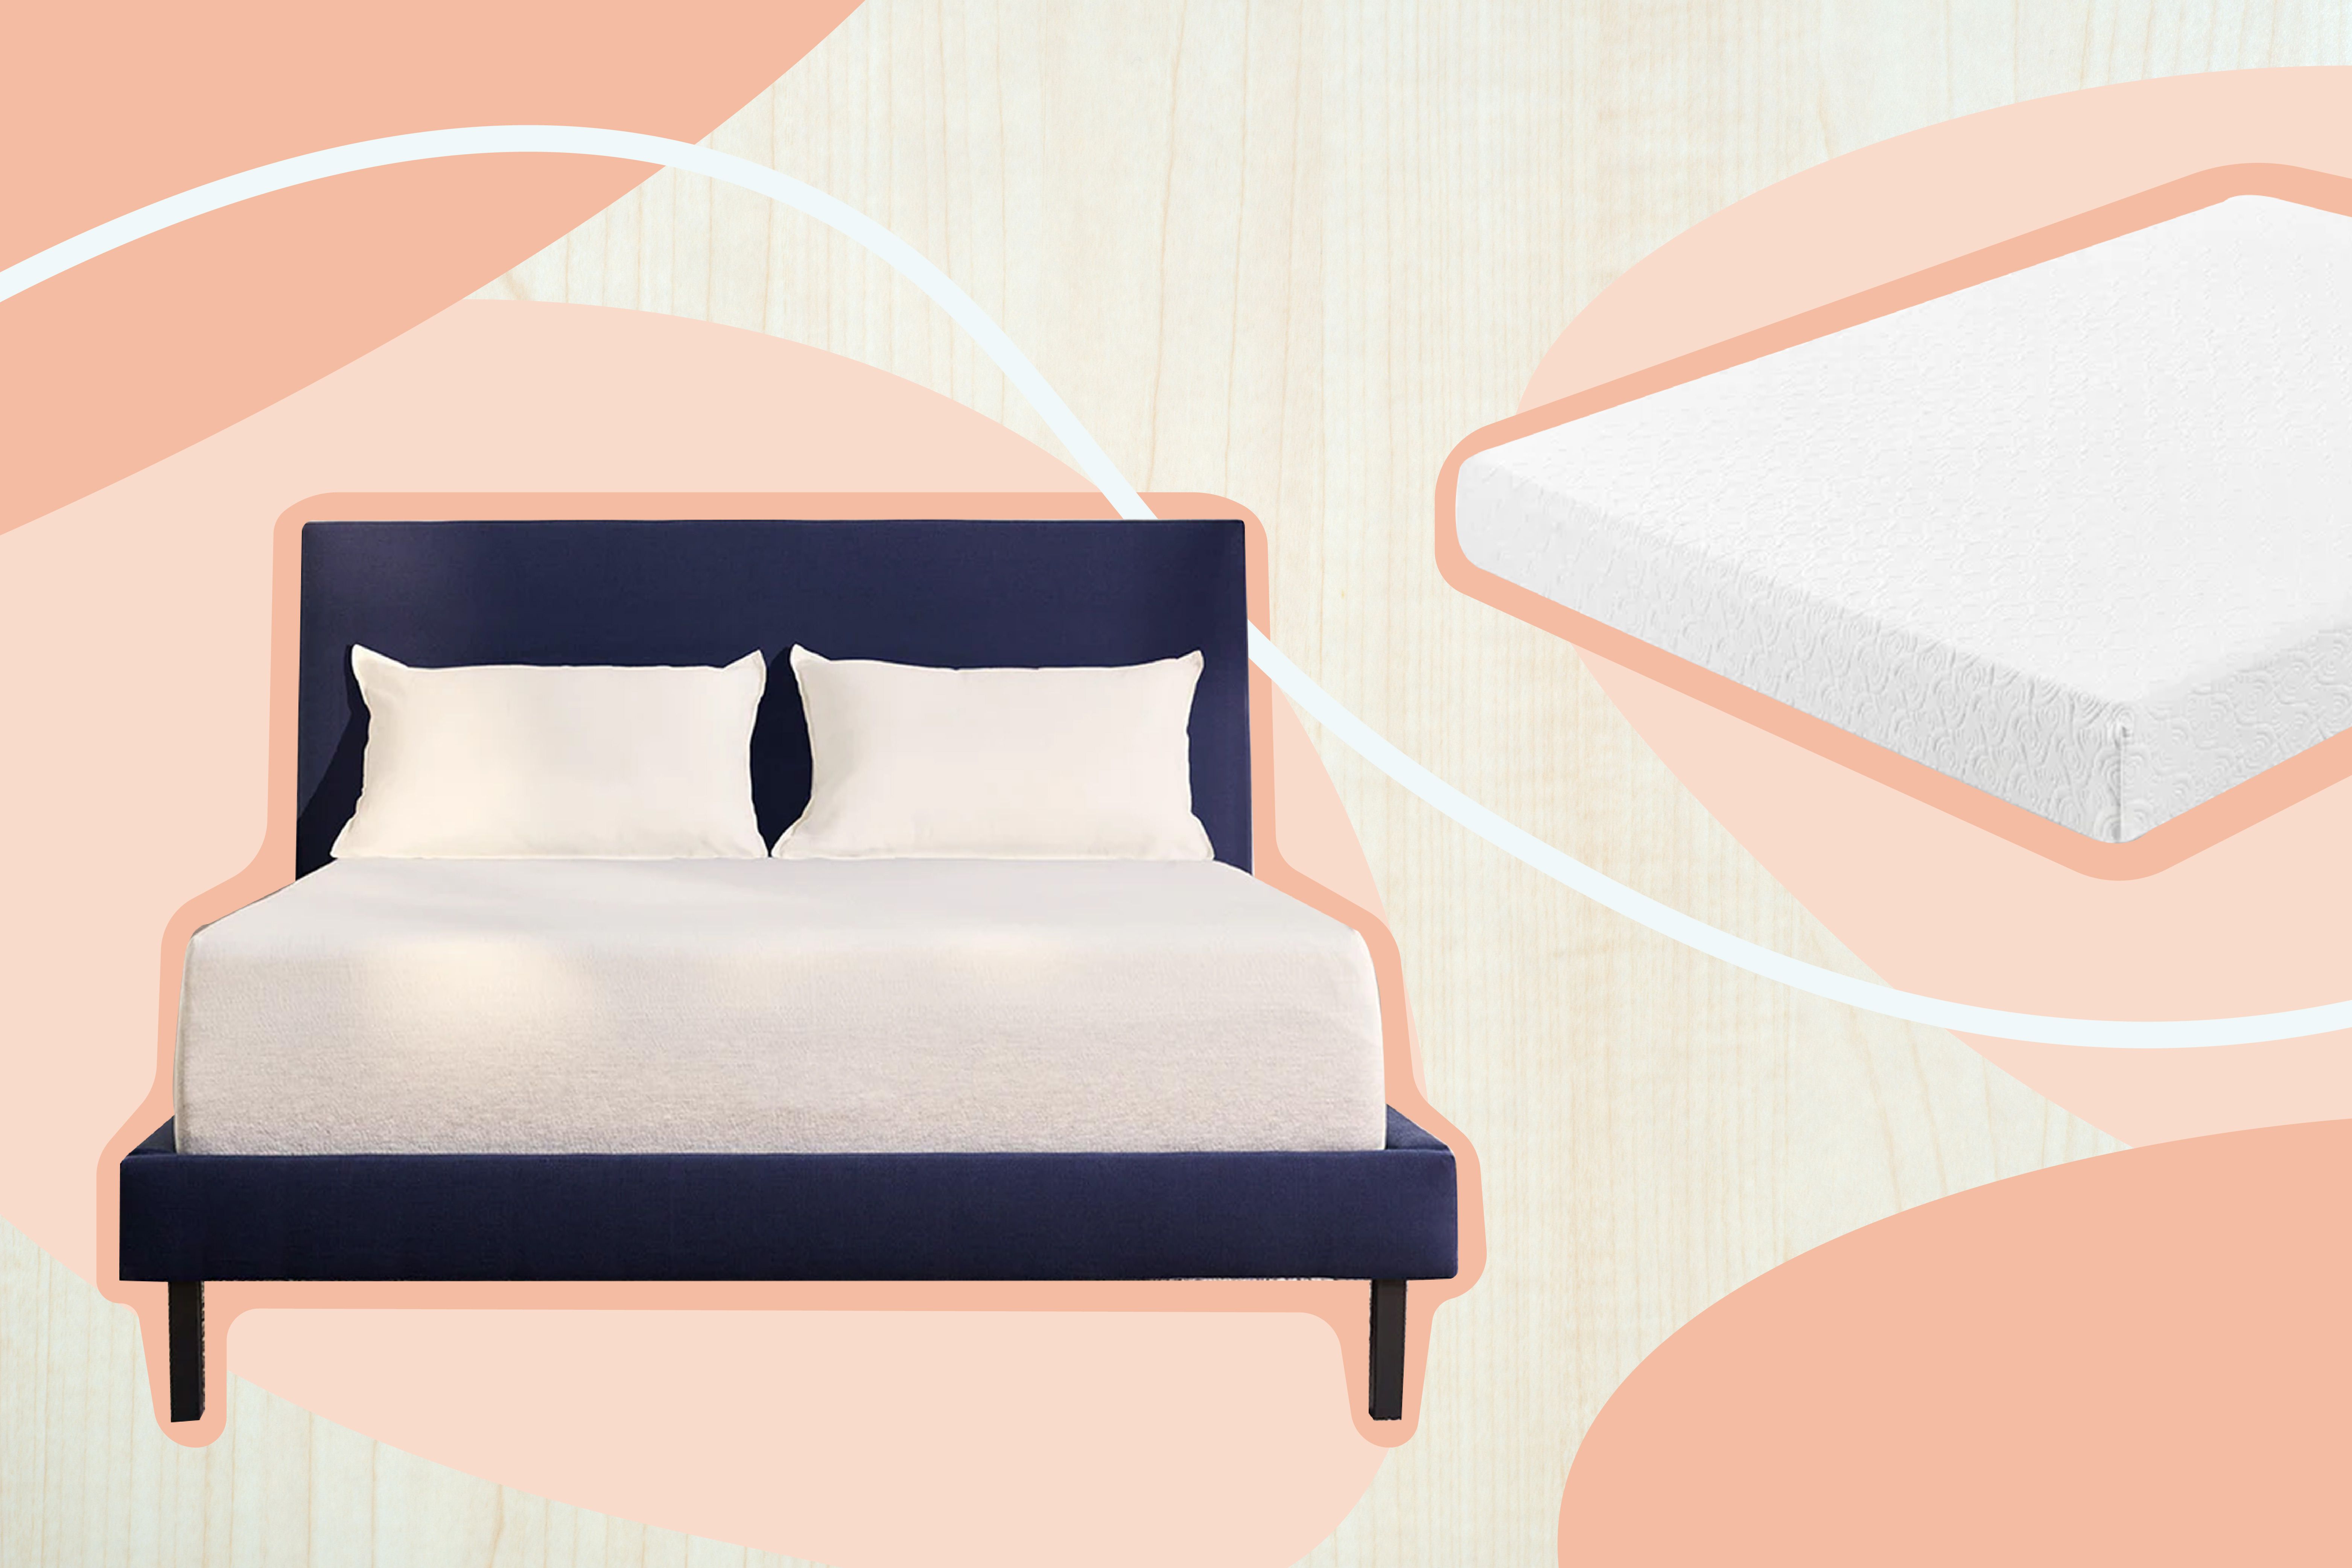 Say Hello to Restful Sleep With the Help of These Mattress Deals